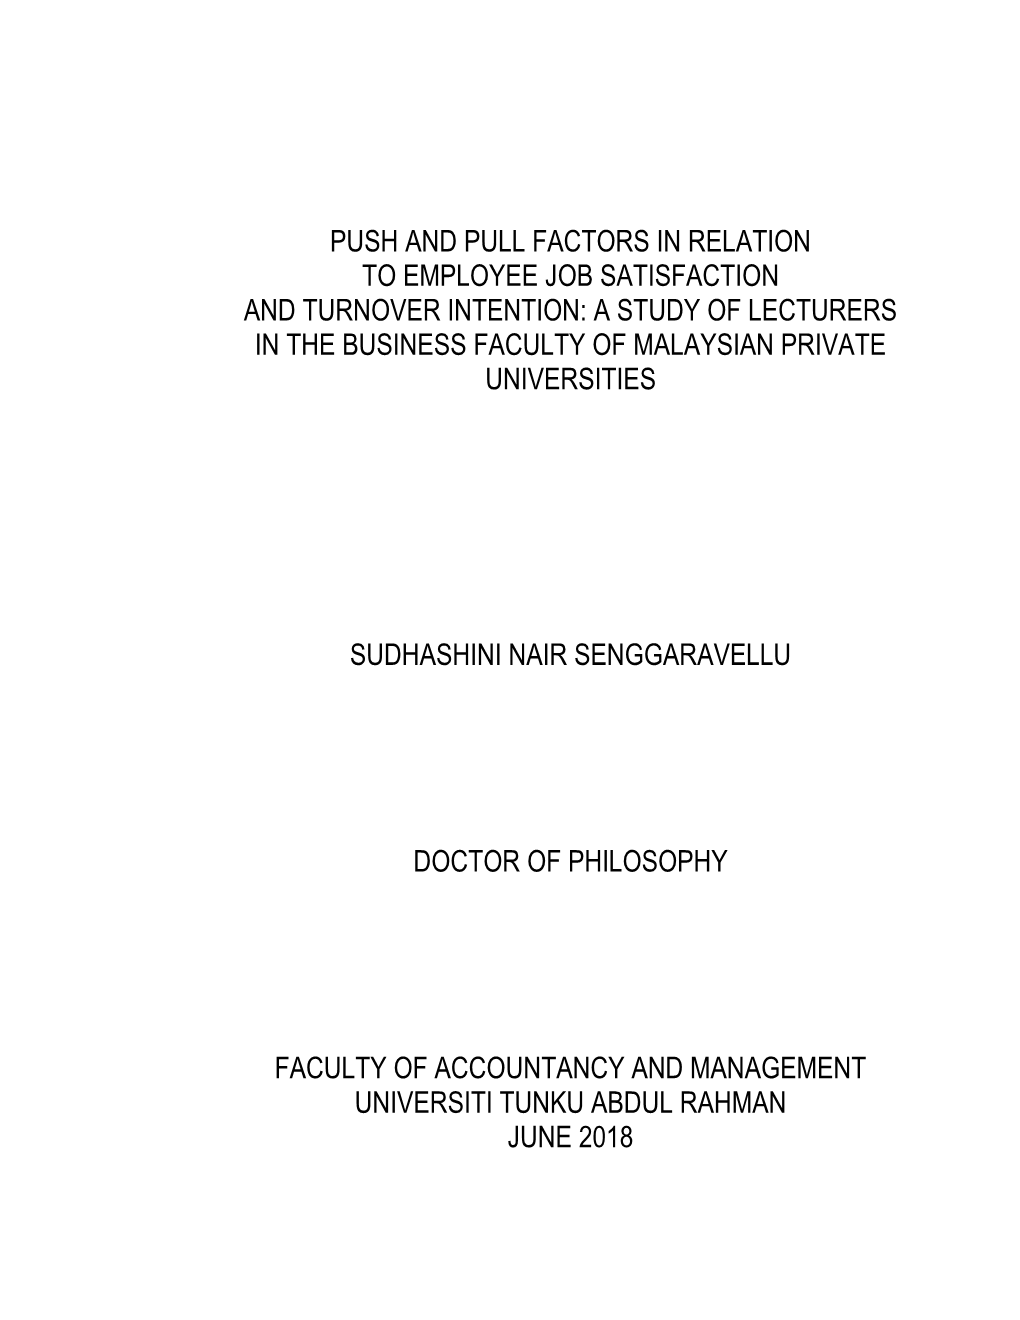 Push and Pull Factors in Relation to Employee Job Satisfaction and Turnover Intention: a Study of Lecturers in the Business Faculty of Malaysian Private Universities